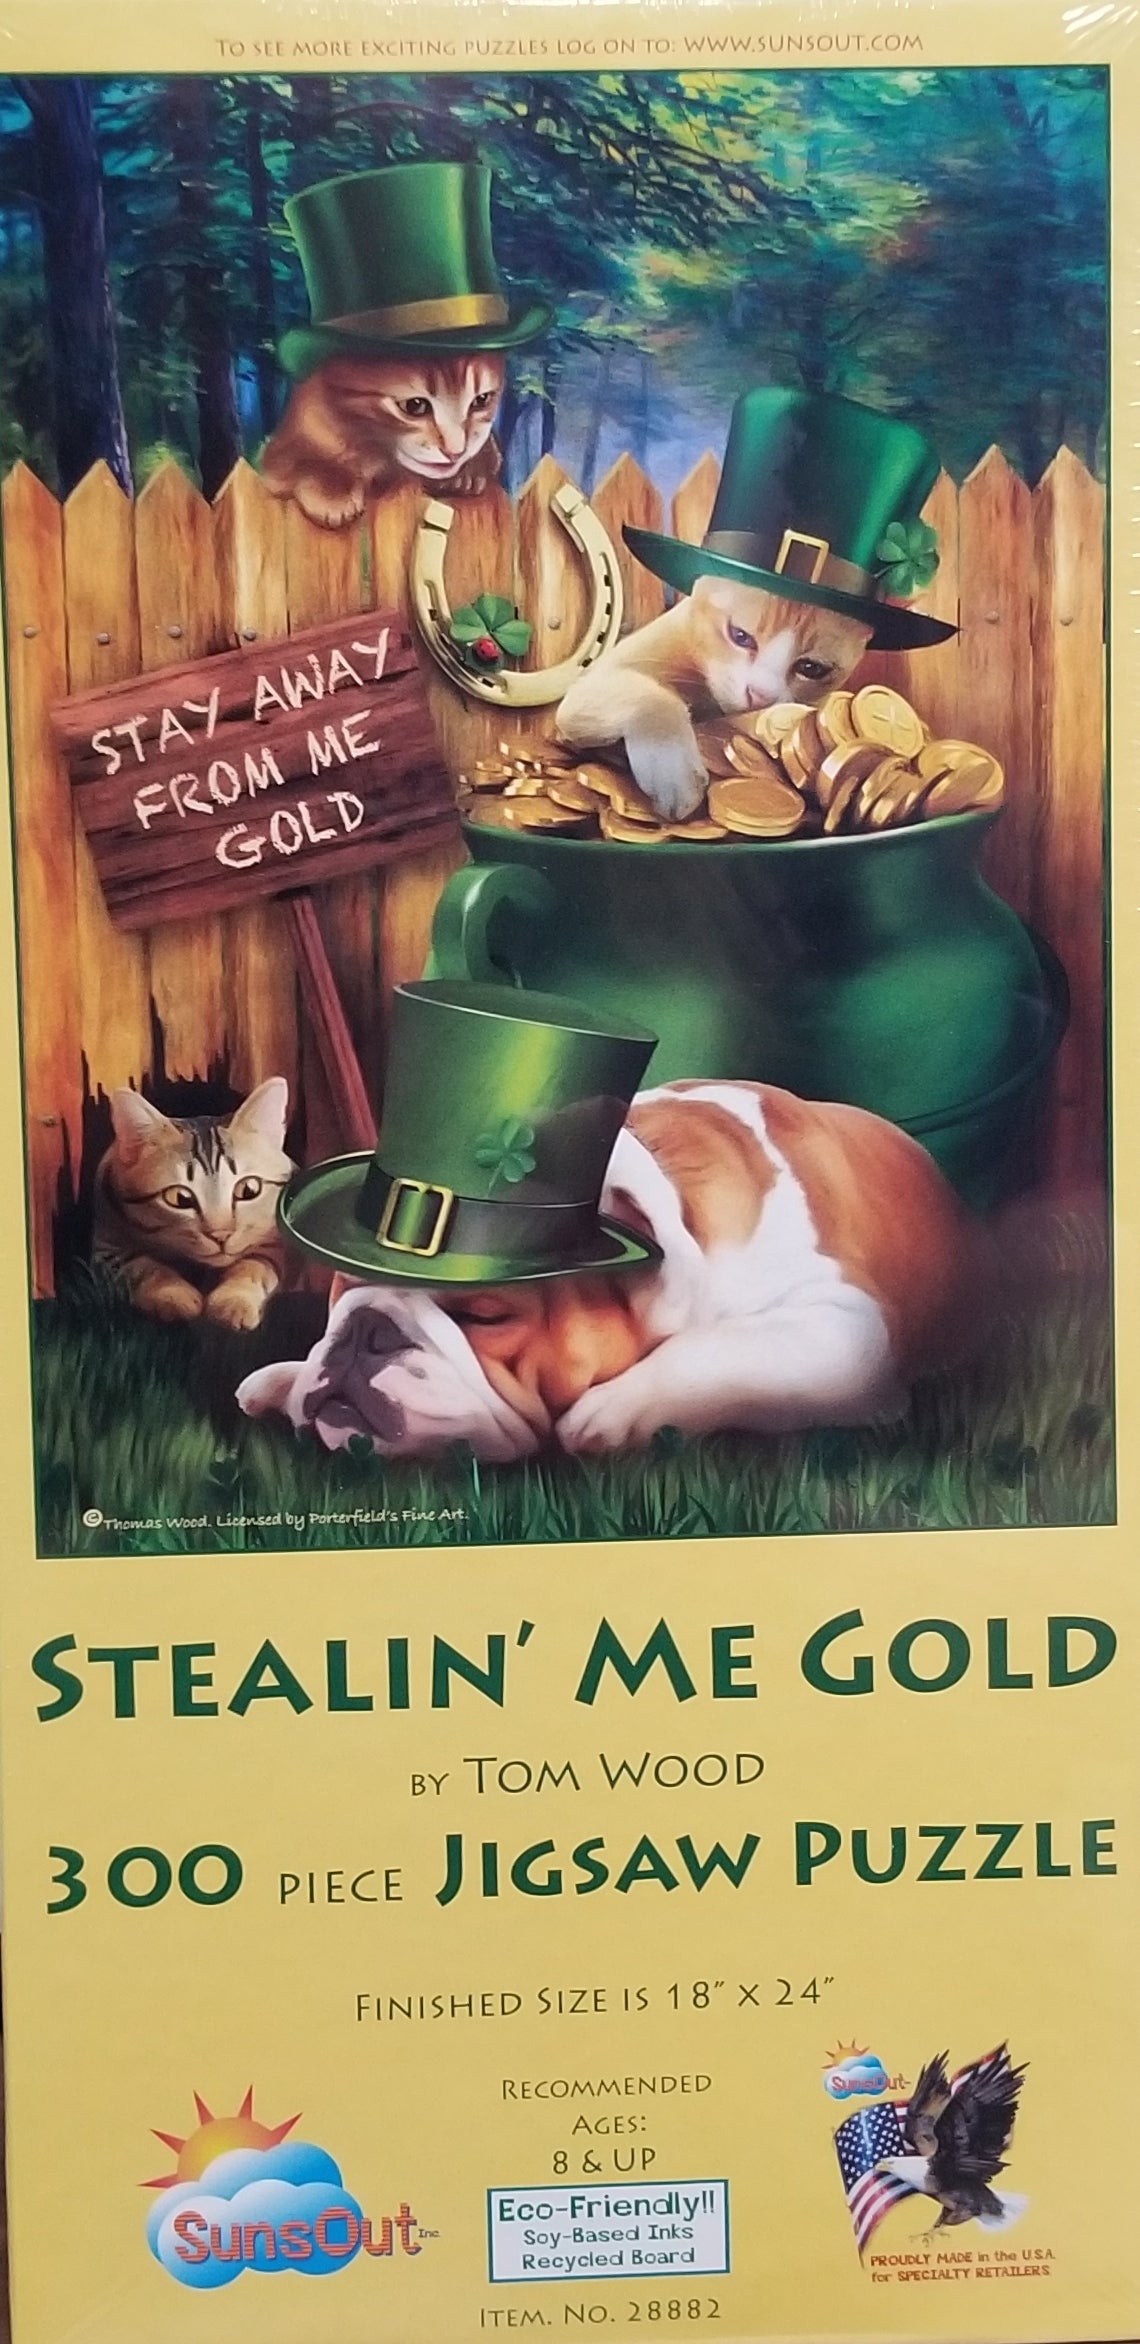 Stealin' Me Gold by Tom Wood, 300 Piece Puzzle